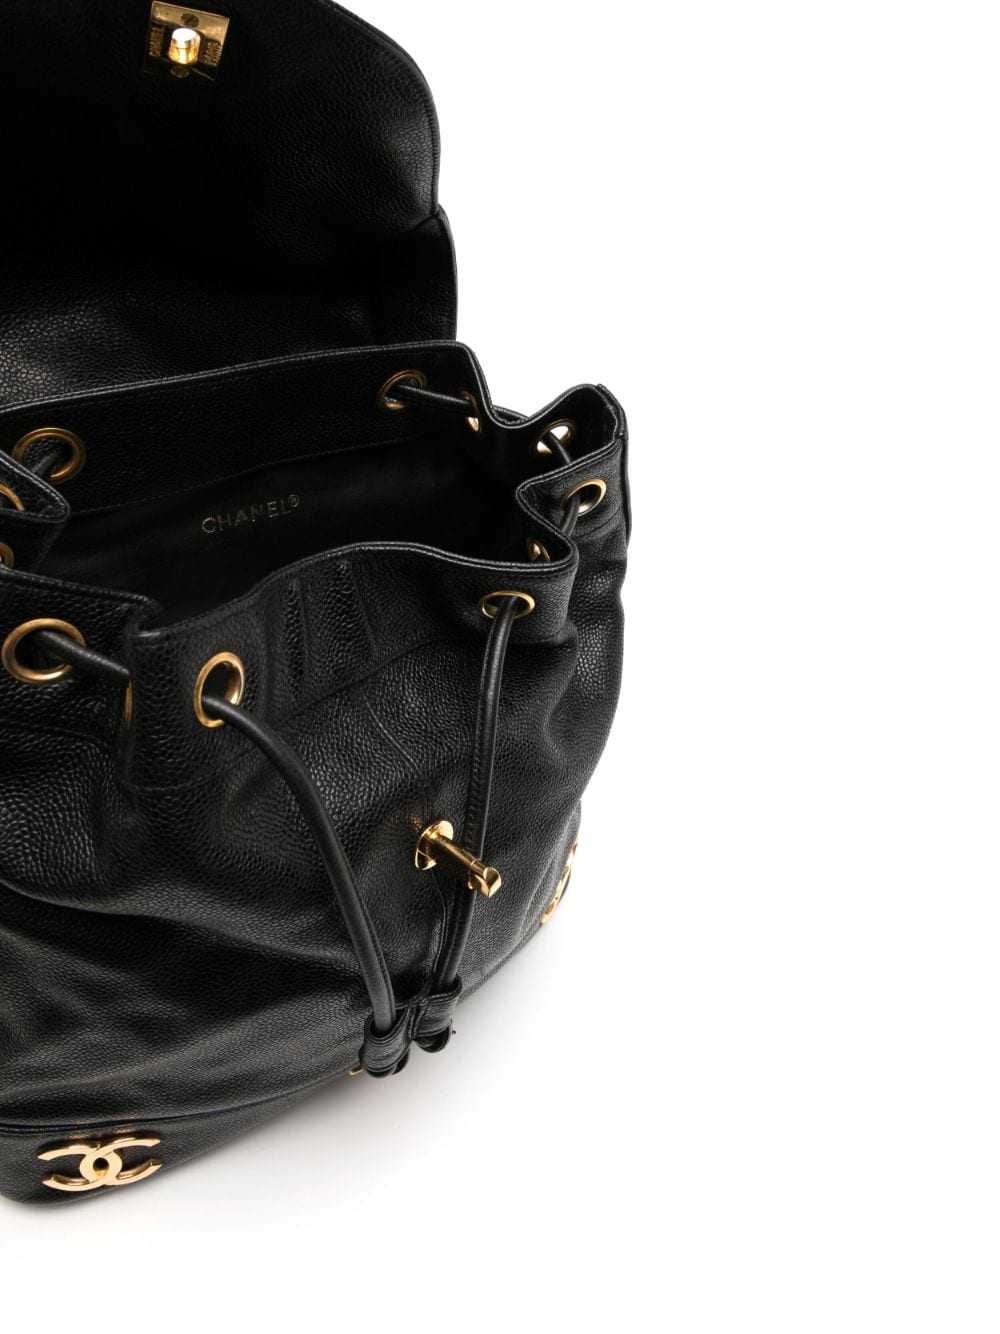 CHANEL Pre-Owned 1992 Triple CC backpack - Black - image 5